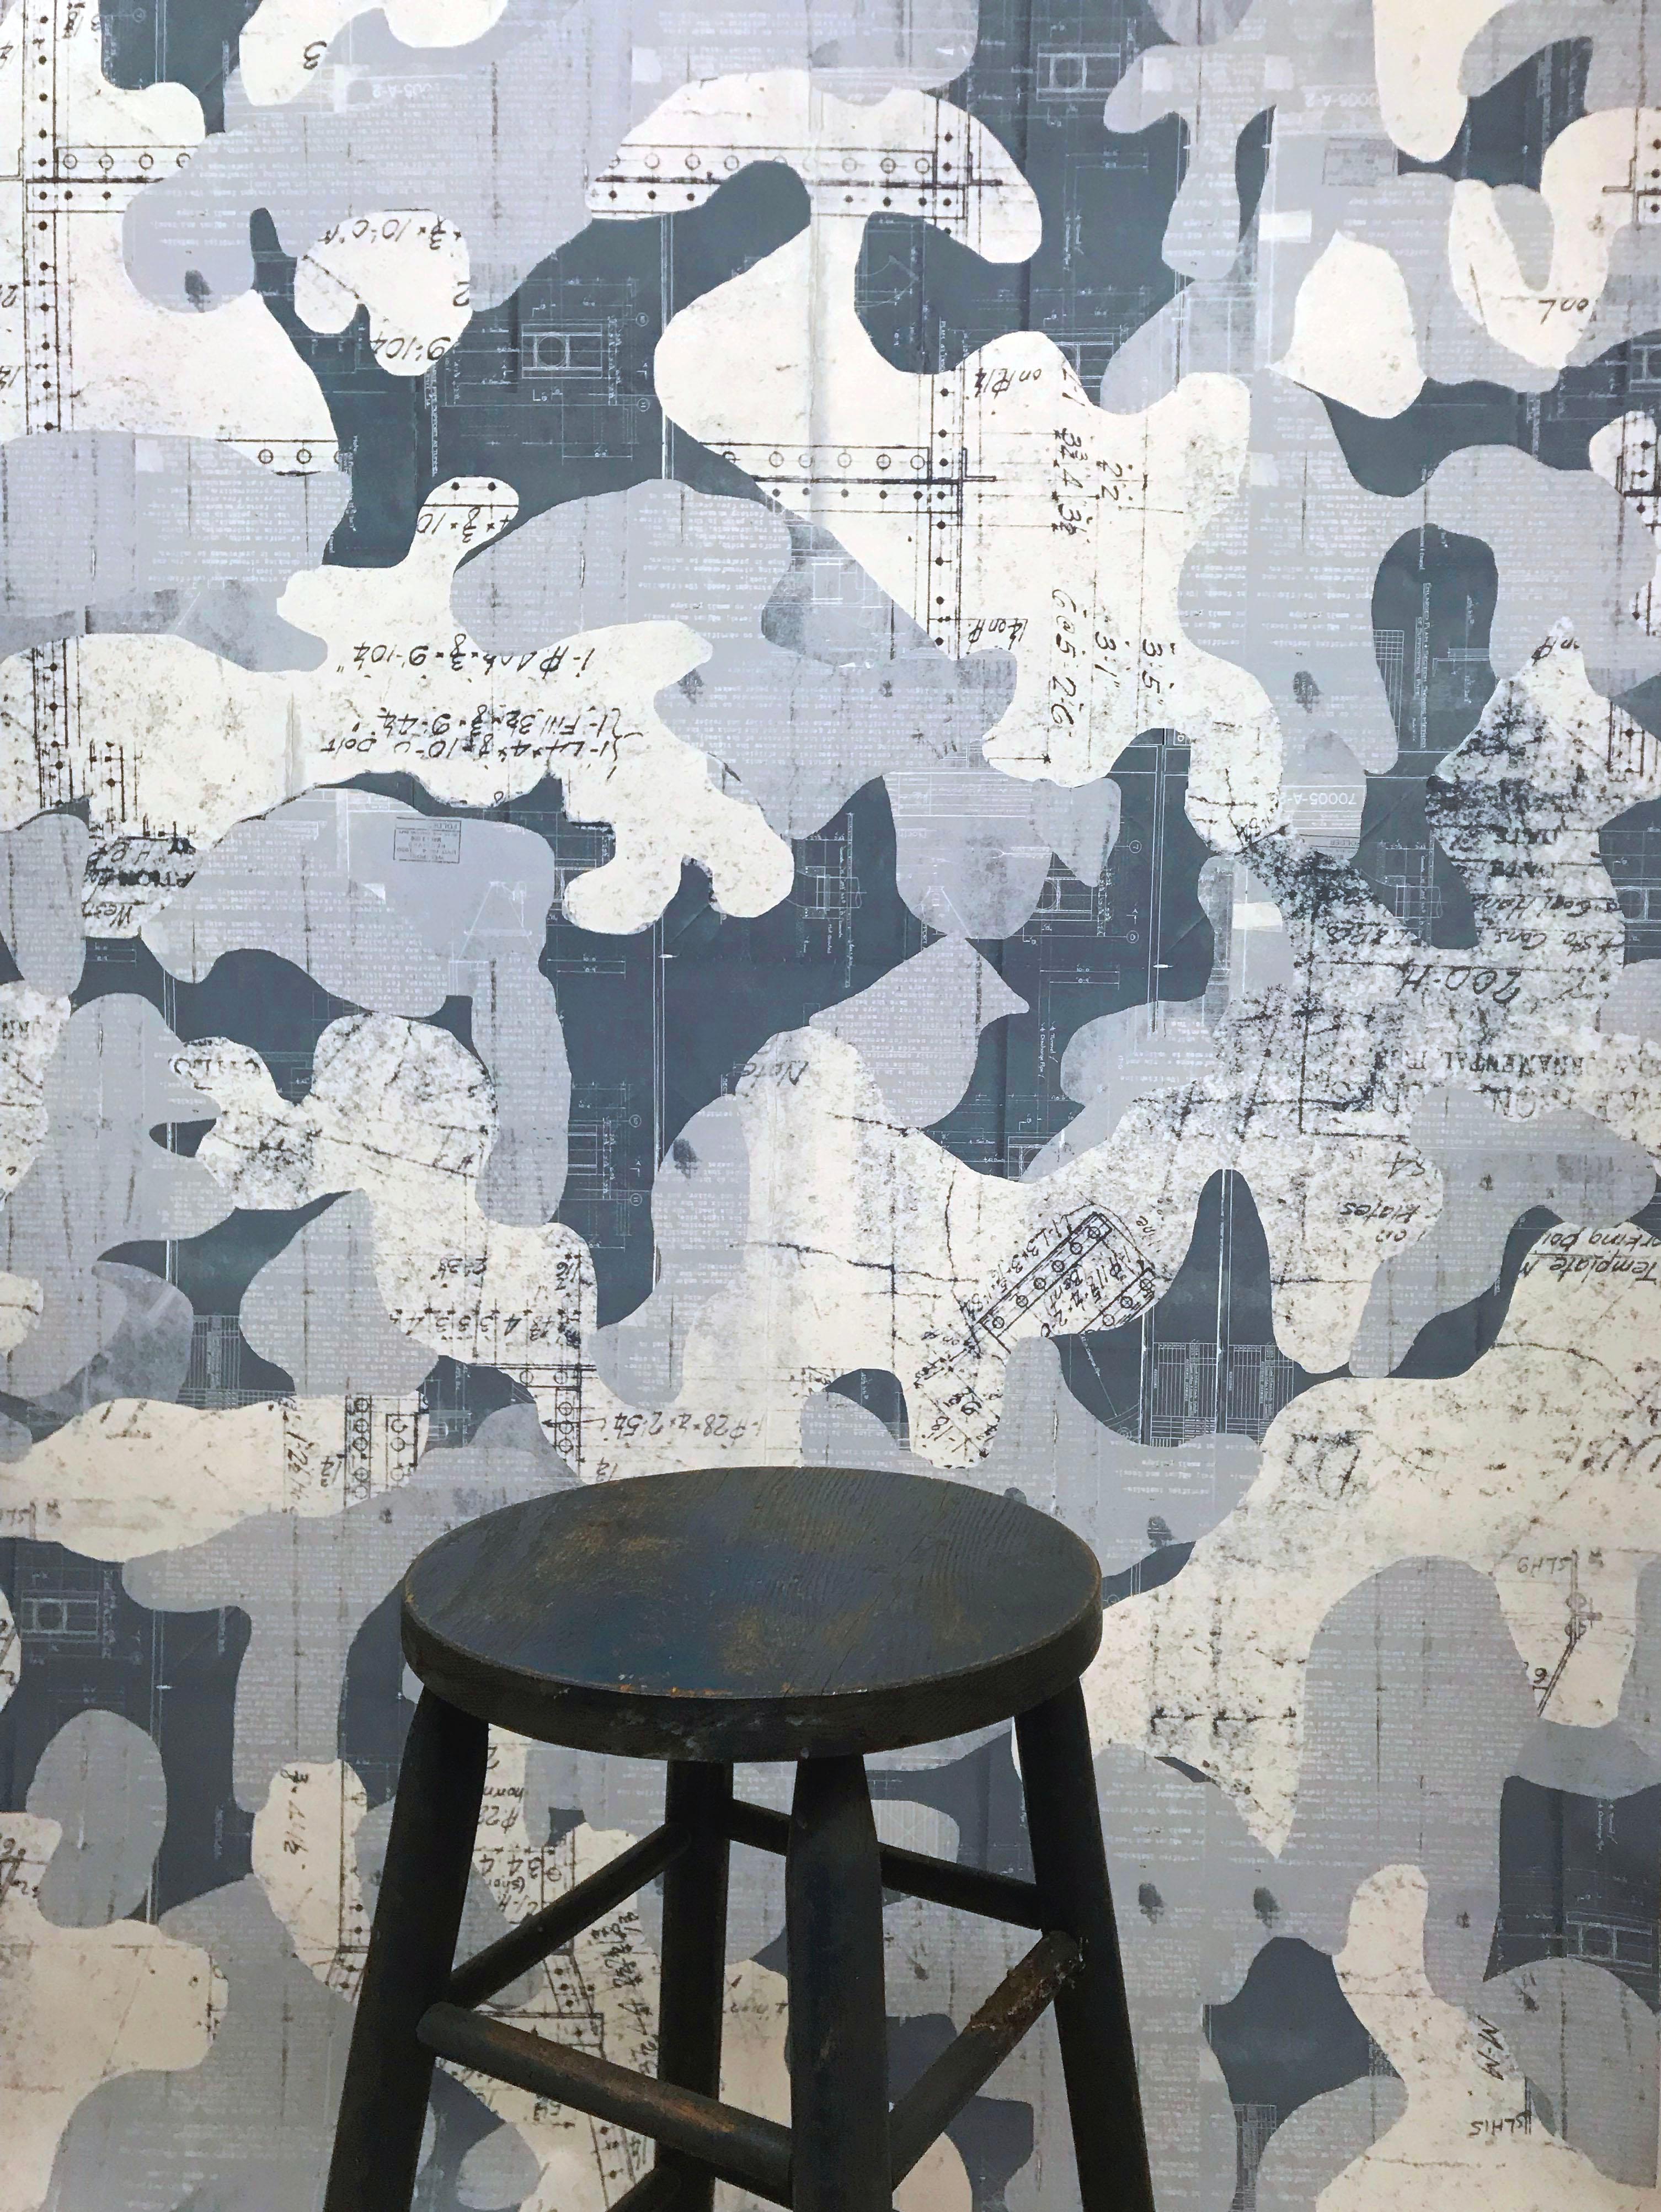 Escape was created using found vintage blue prints from the early to mid 1900’s and placed into a fluid, hand drawn camouflage pattern. Intrigued by the idea that blue prints and camo have a utilitarian purpose, we combined them creating an opposite